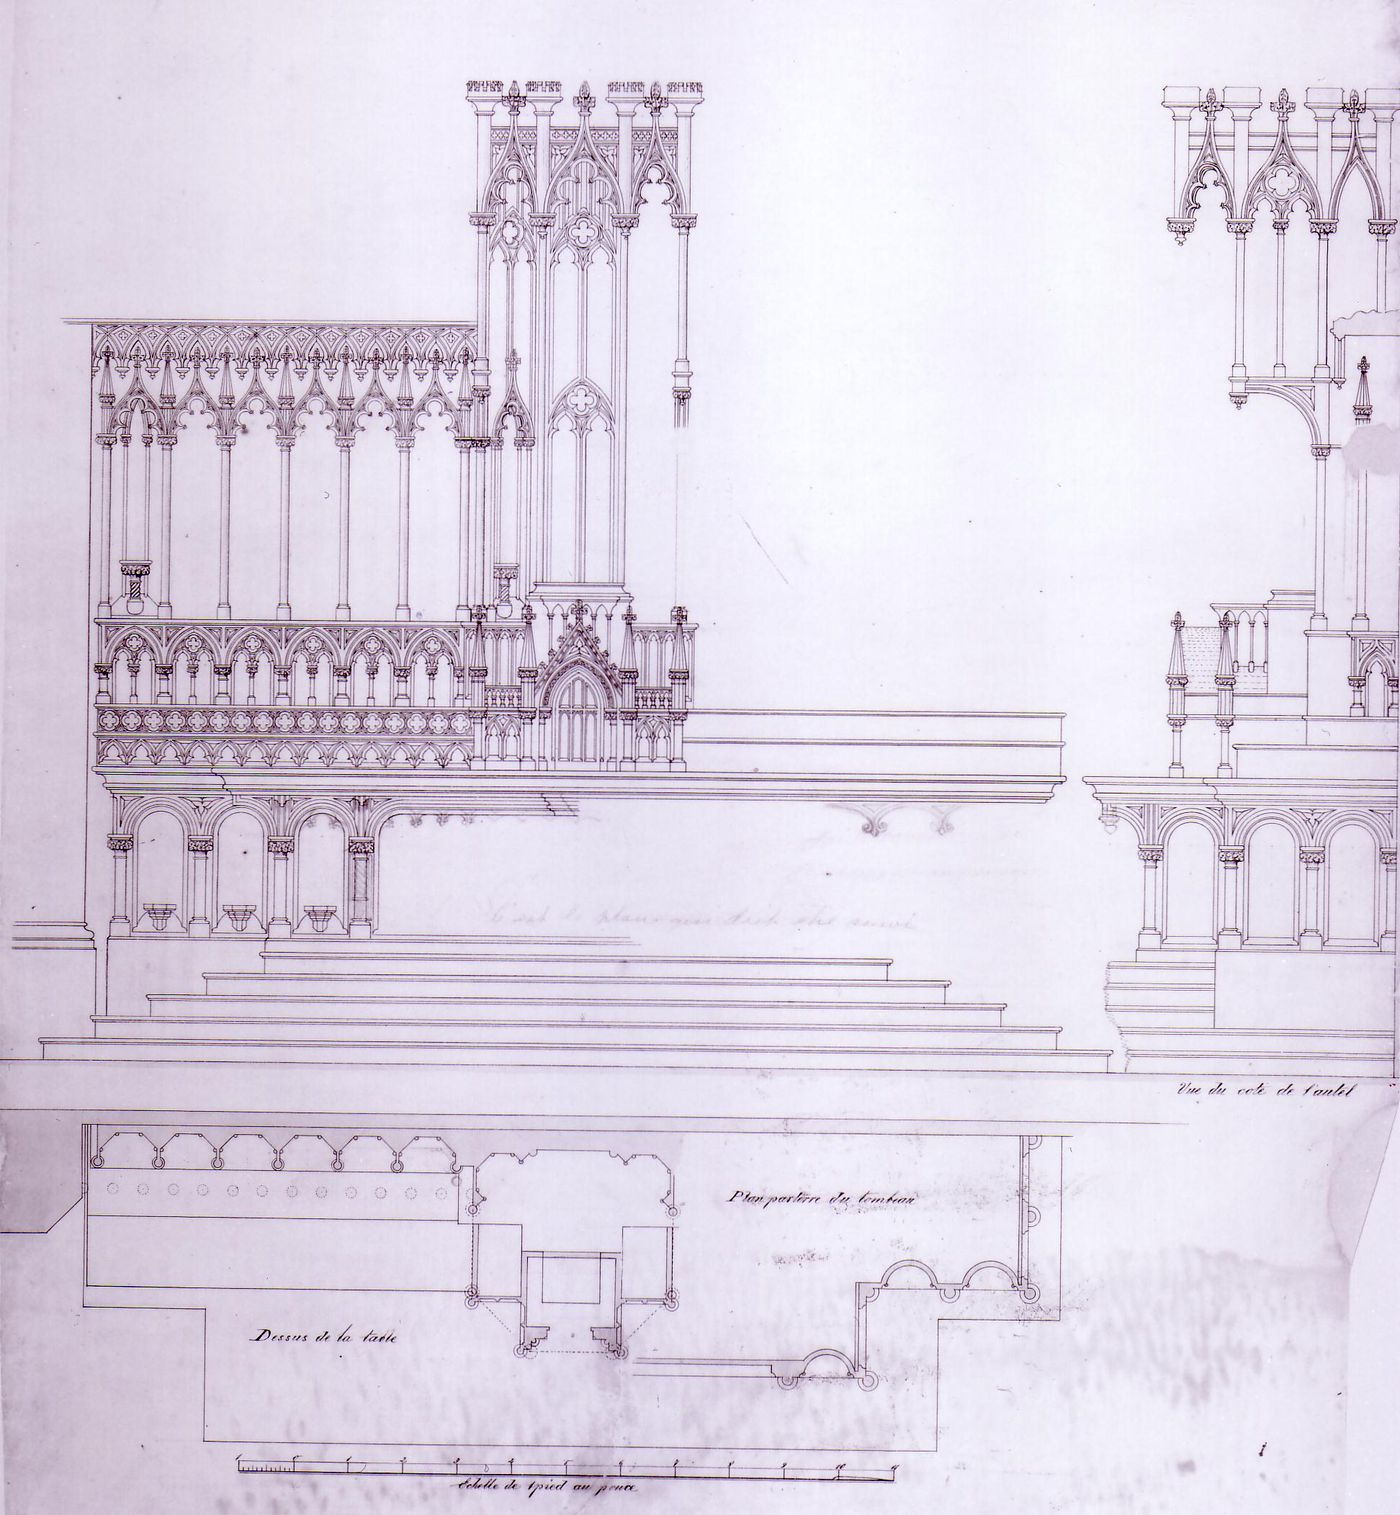 Plan and front and lateral elevations for the high altar for the interior design by Bourgeau et Leprohon for Notre-Dame de Montréal